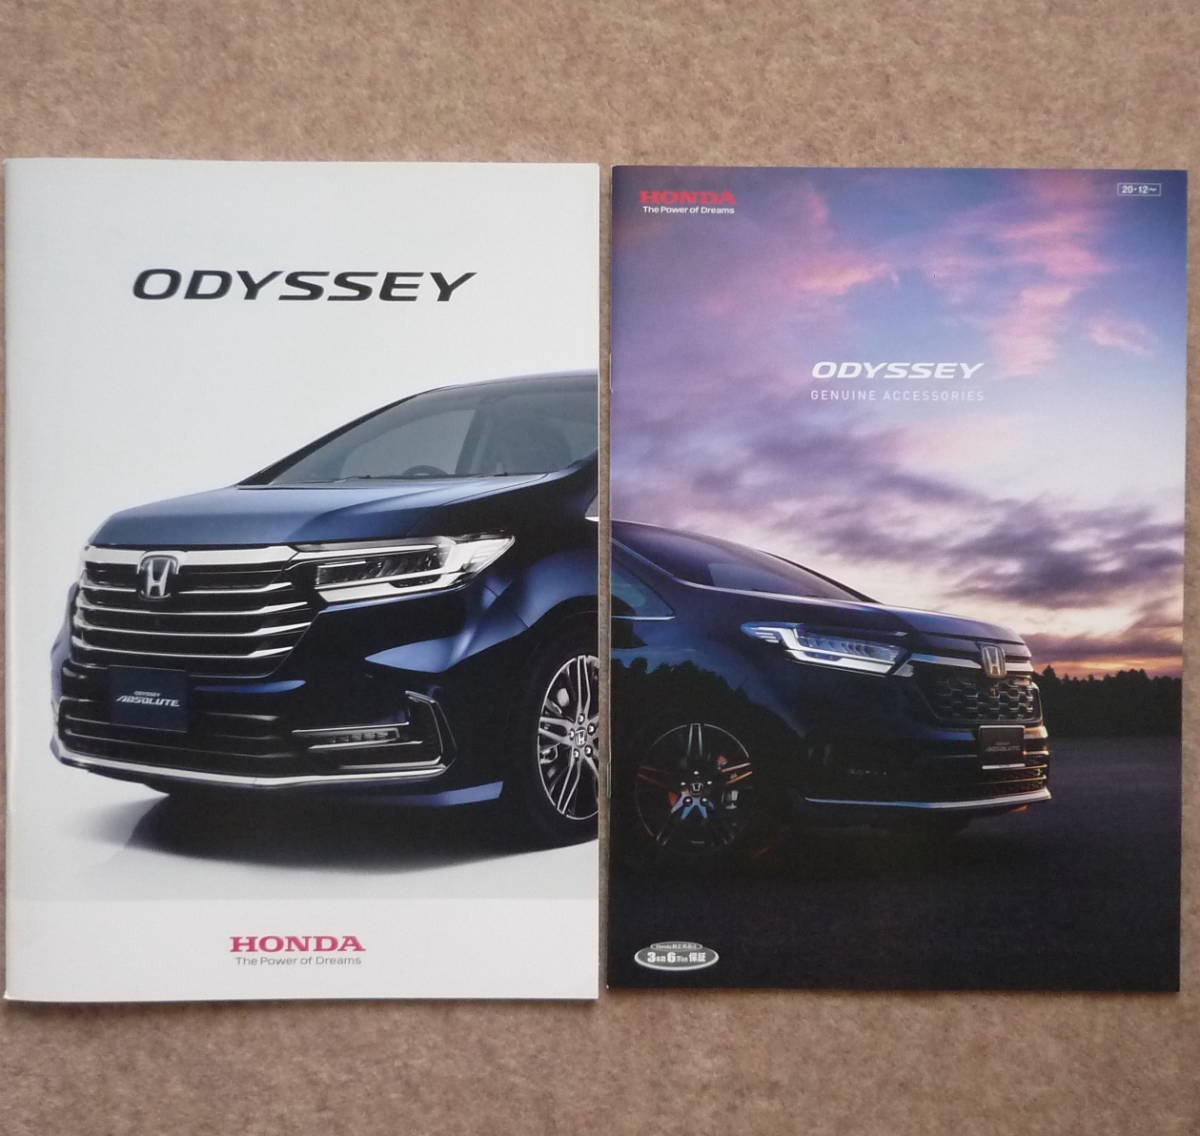  Odyssey catalog RC1 RC2 RC4 e:HEV ABSOLUTE 2020 year 11 month 